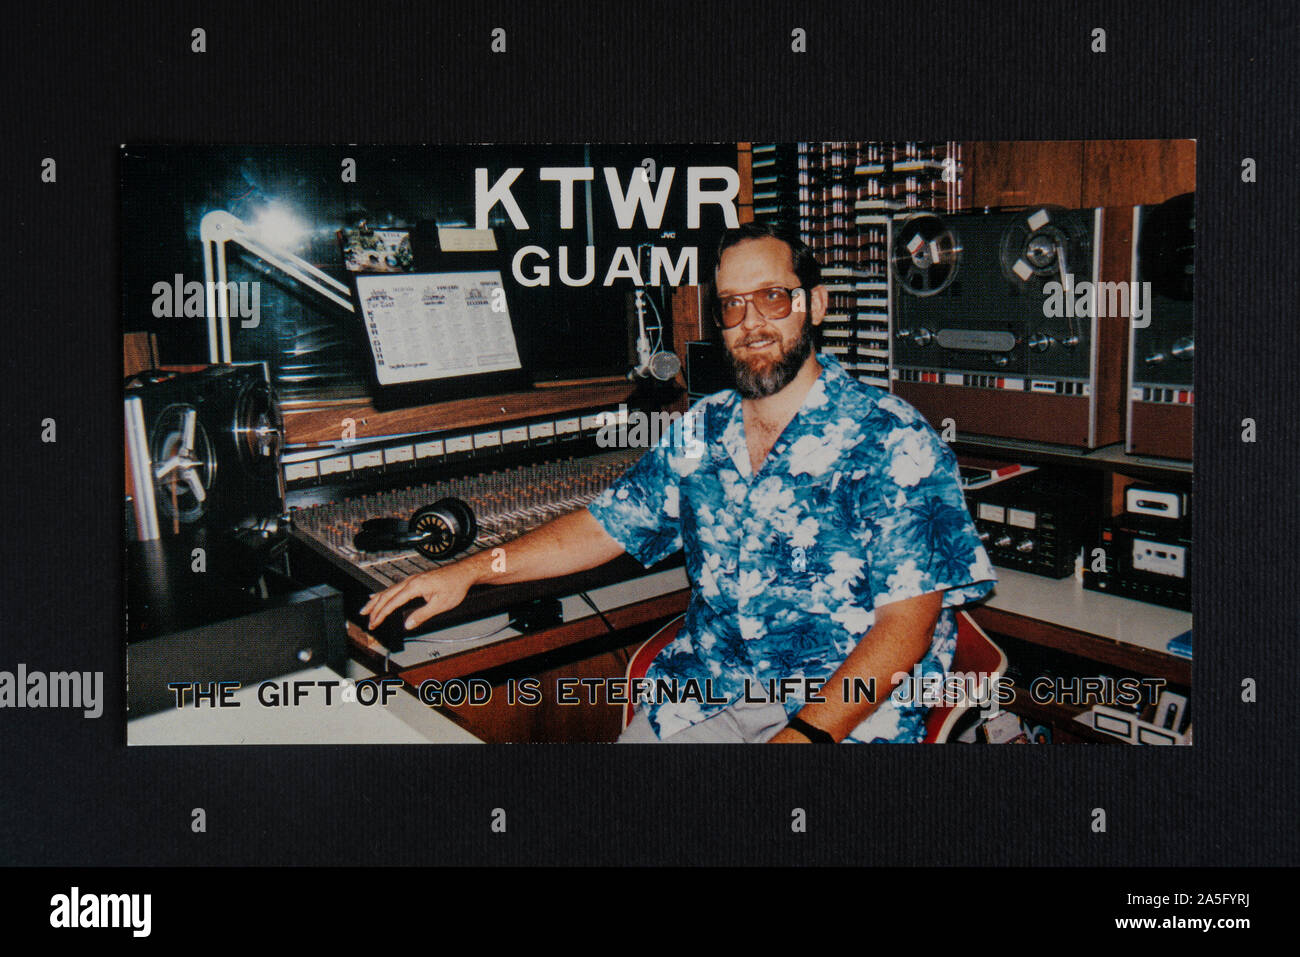 a QSL card of the KTWR radio station from the Guam Island, Pacific ocean Stock Photo